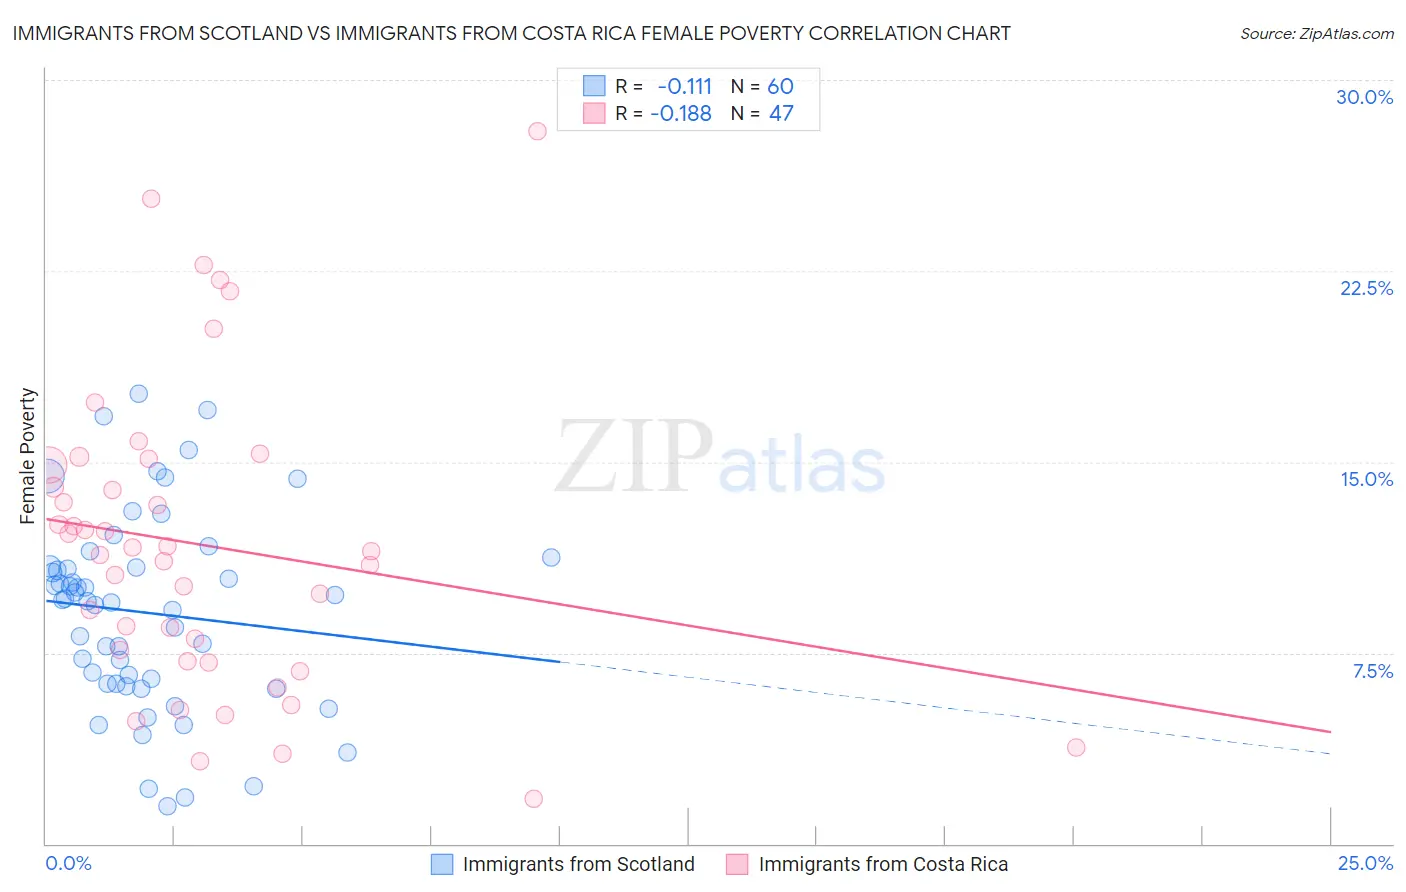 Immigrants from Scotland vs Immigrants from Costa Rica Female Poverty